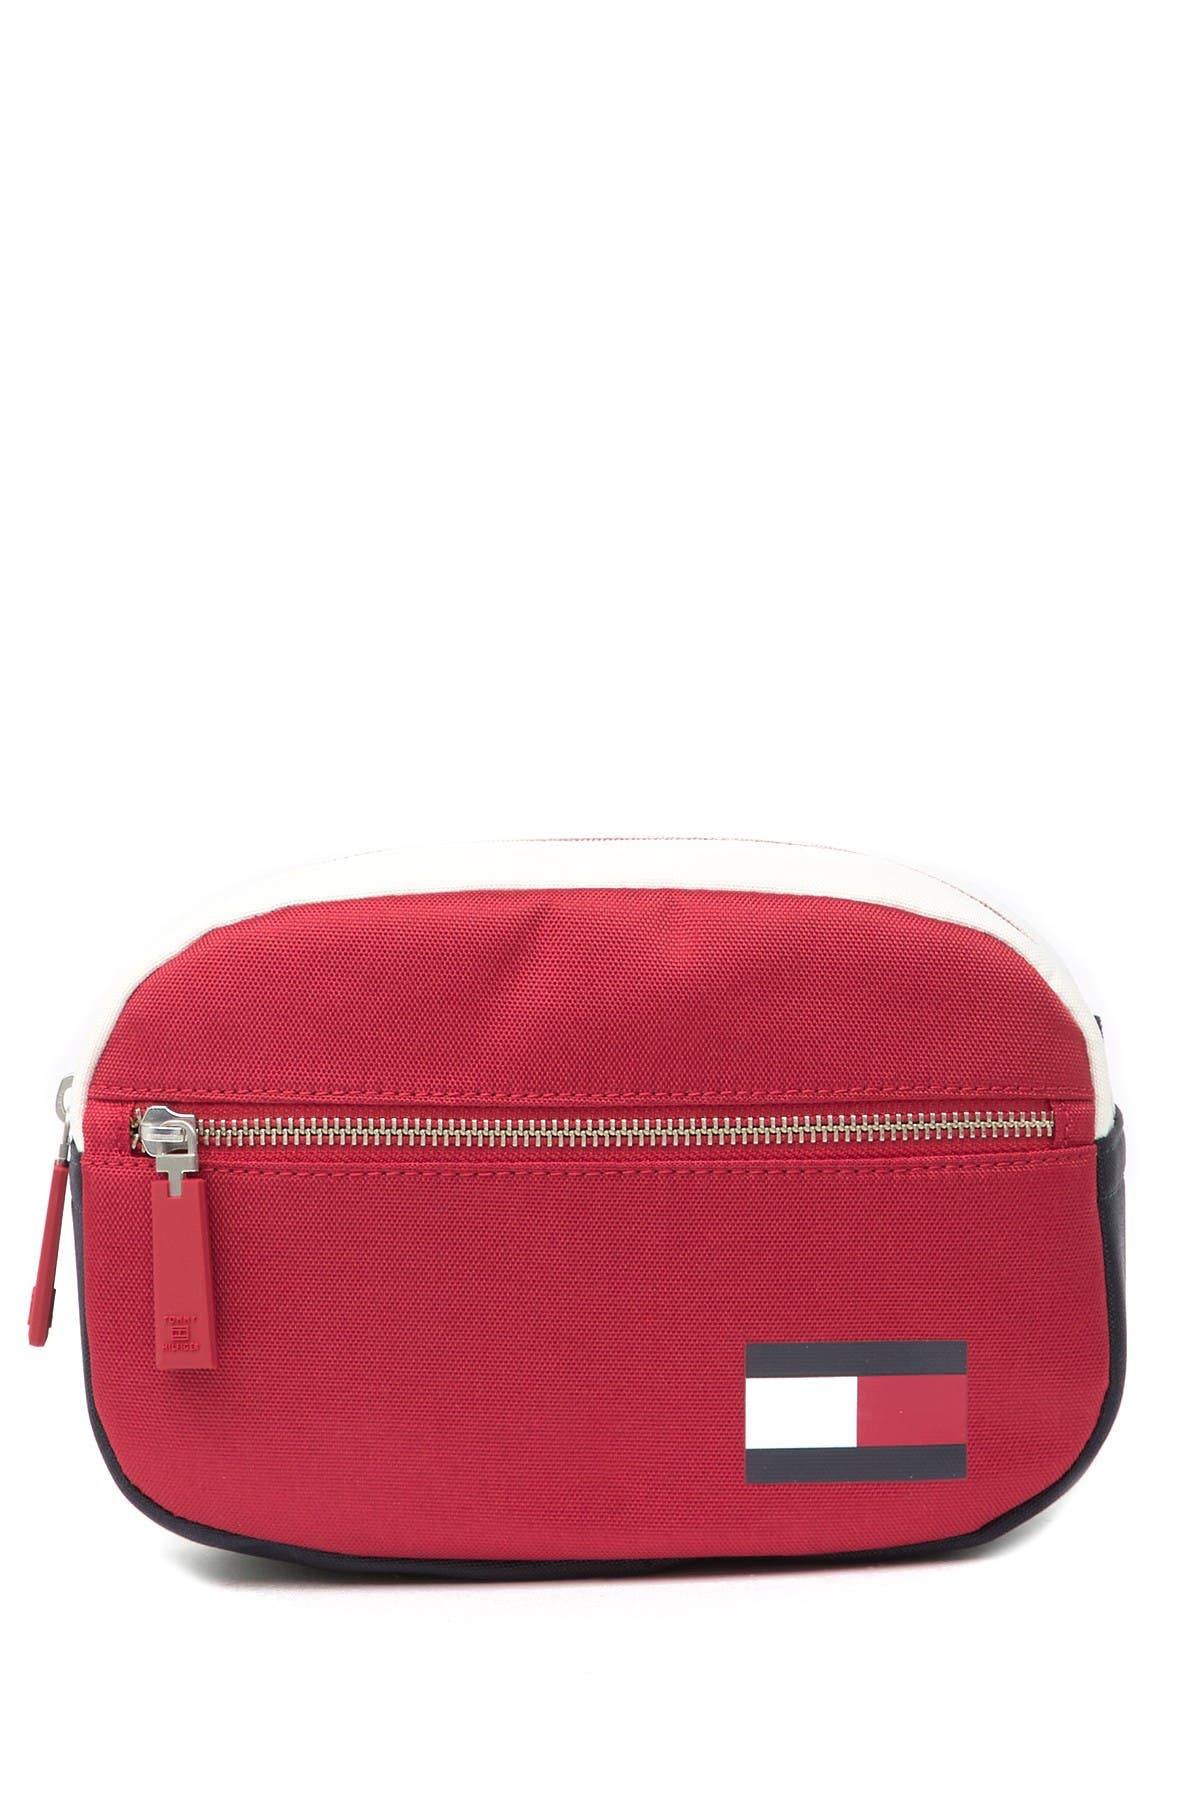 tommy hilfiger fanny pack red